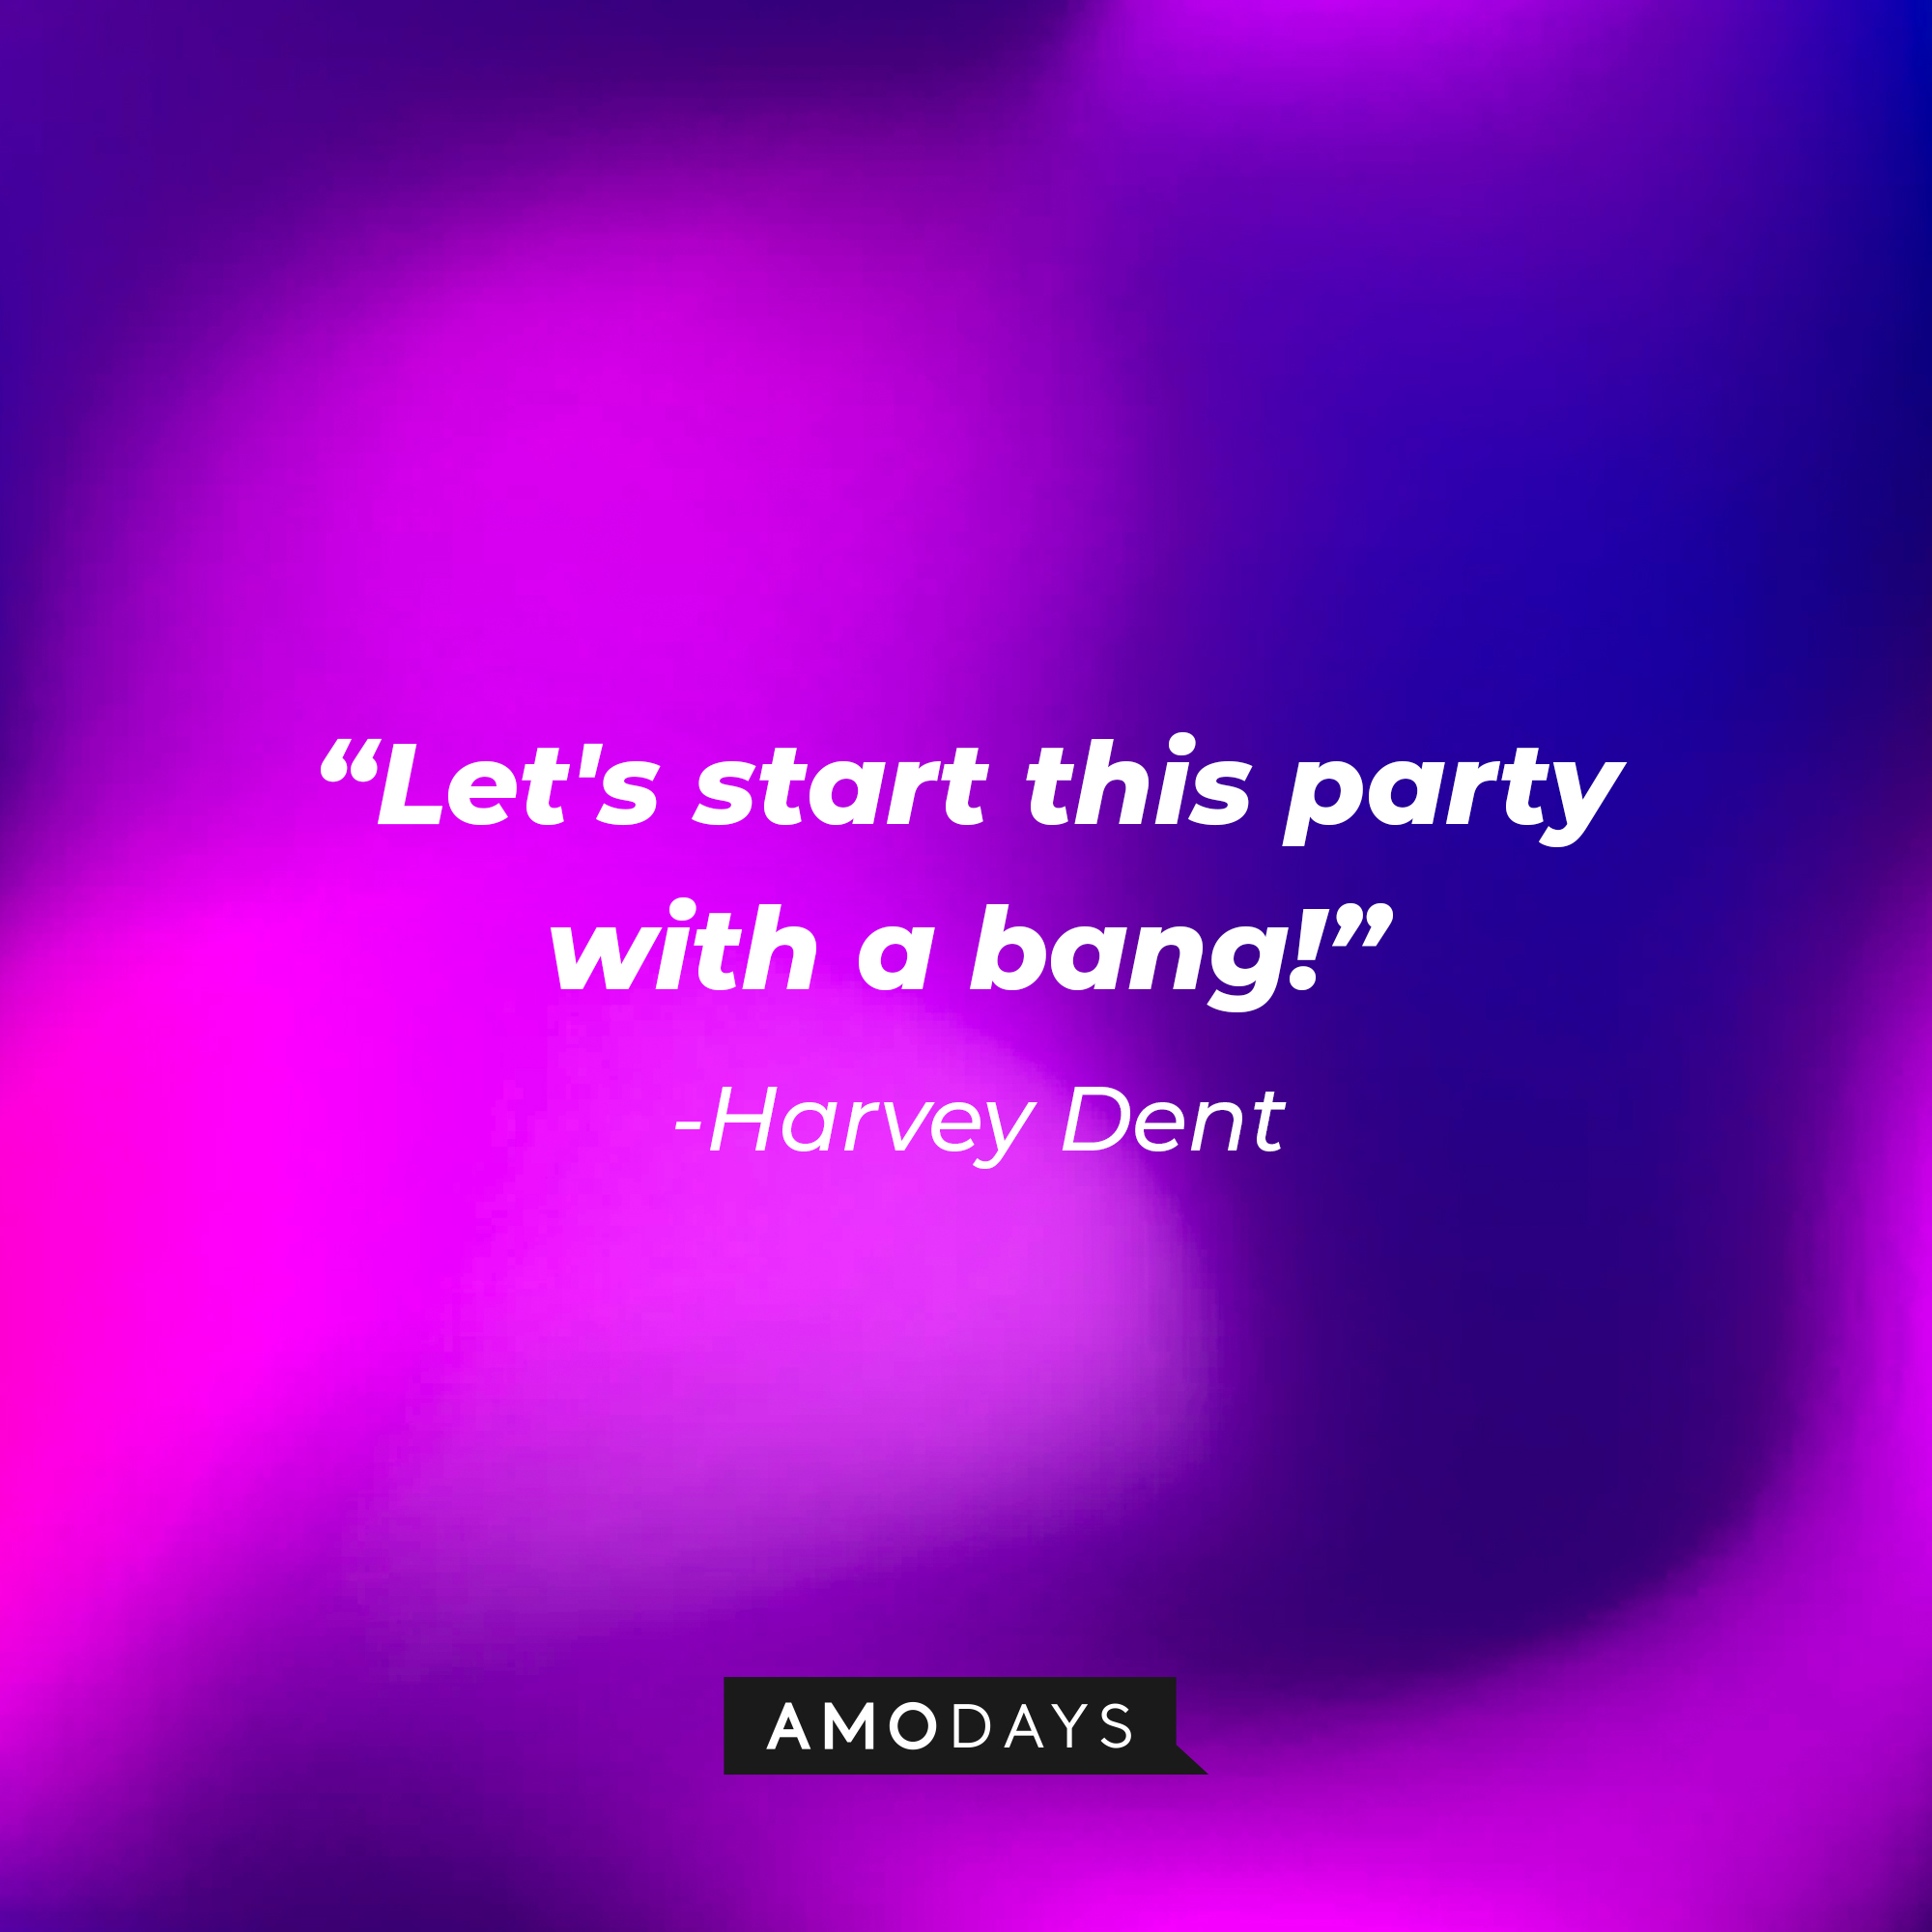 Harvey Dent's quote: “Let's start this party with a bang!” | Source: facebook.com/darkknighttrilogy